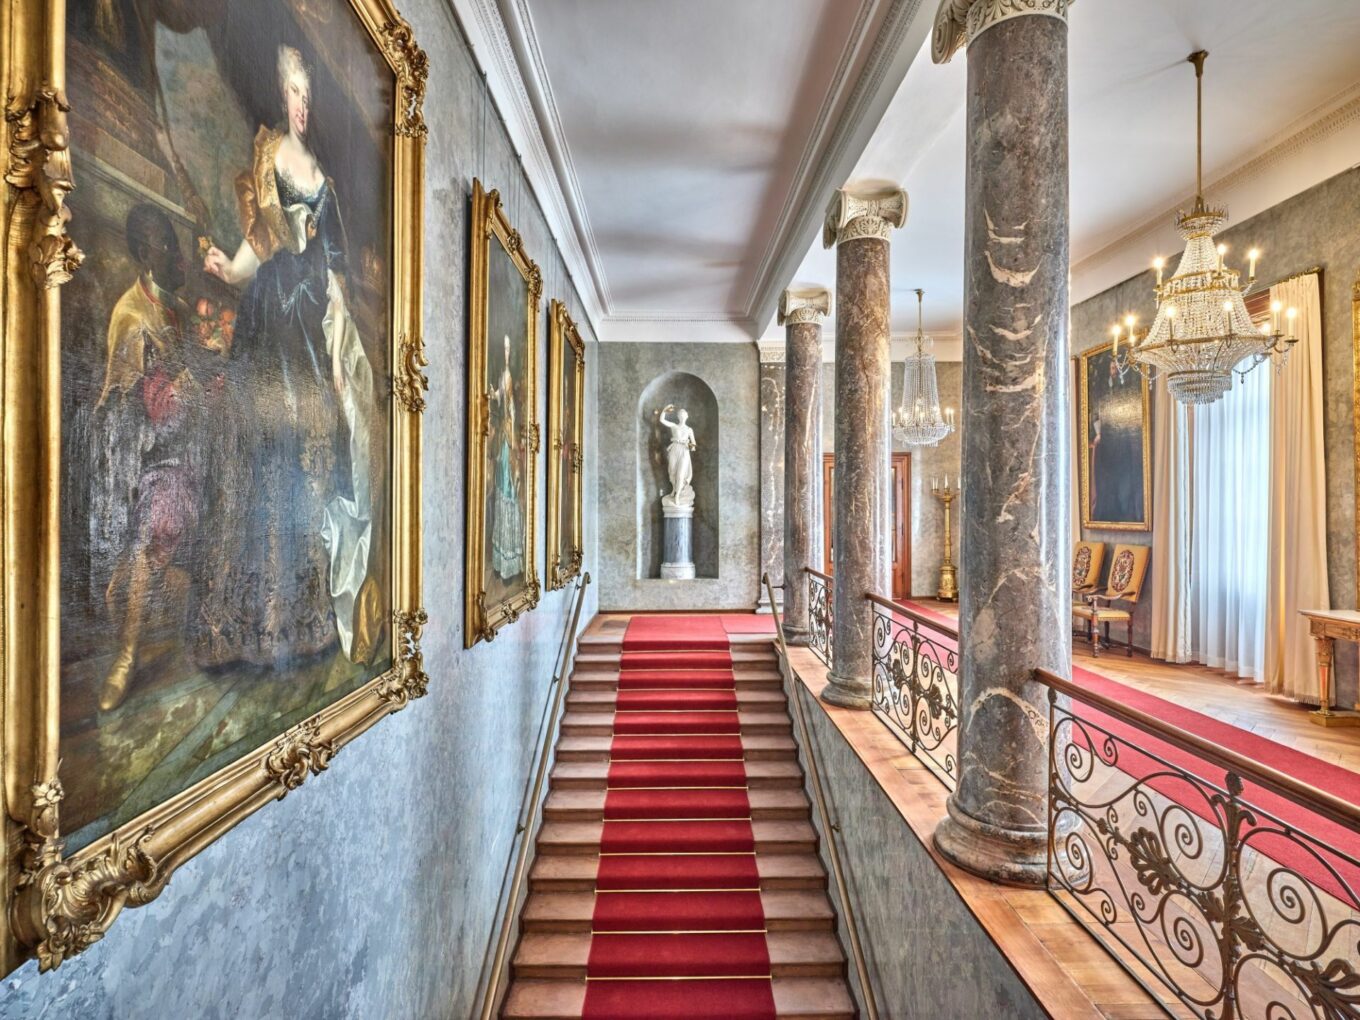 Main staircase to the Imperial Rooms in Bad Homburg Palace